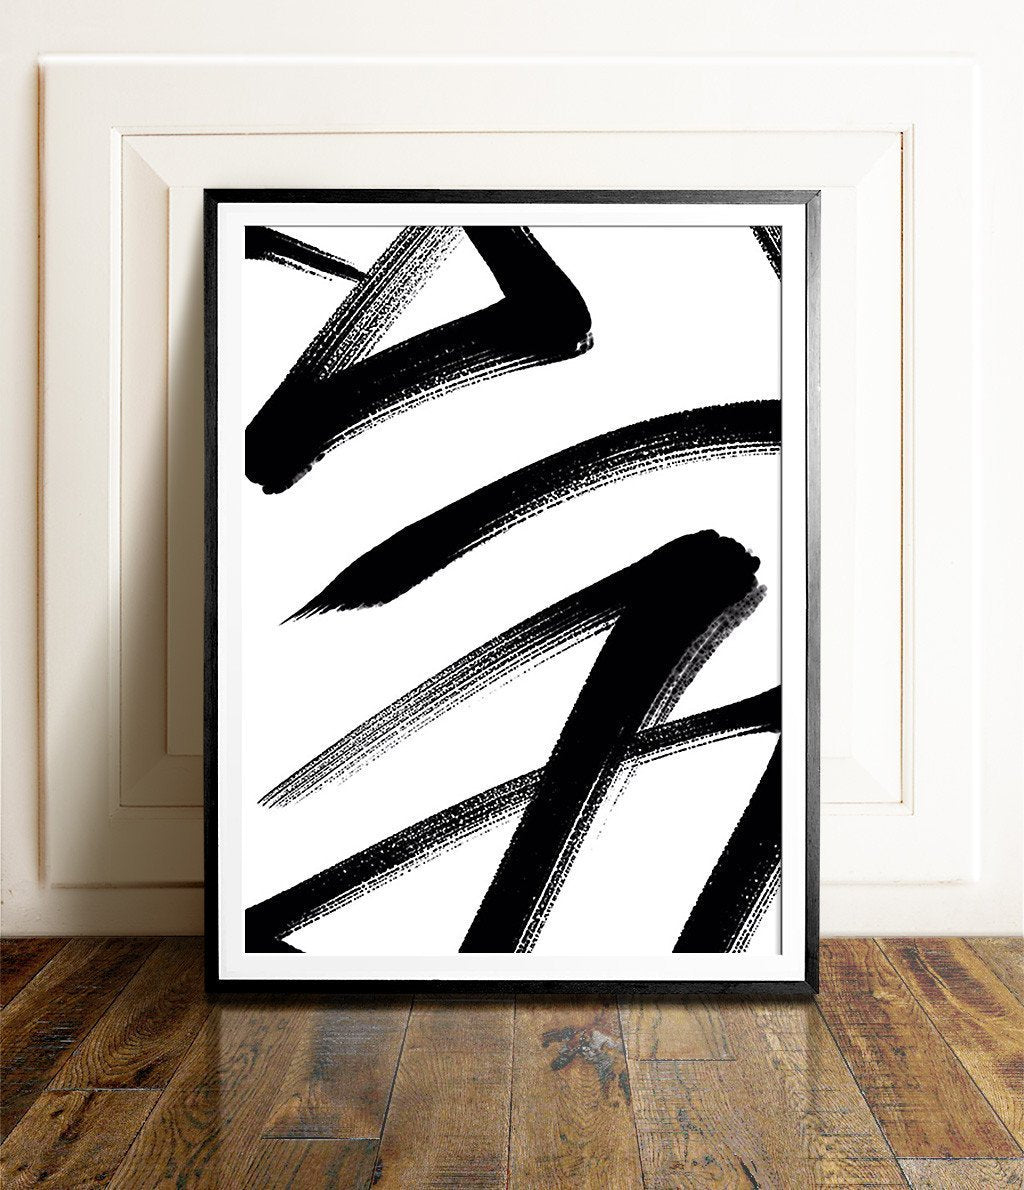 Abstract Black & White Brushstrokes - The Crown Prints